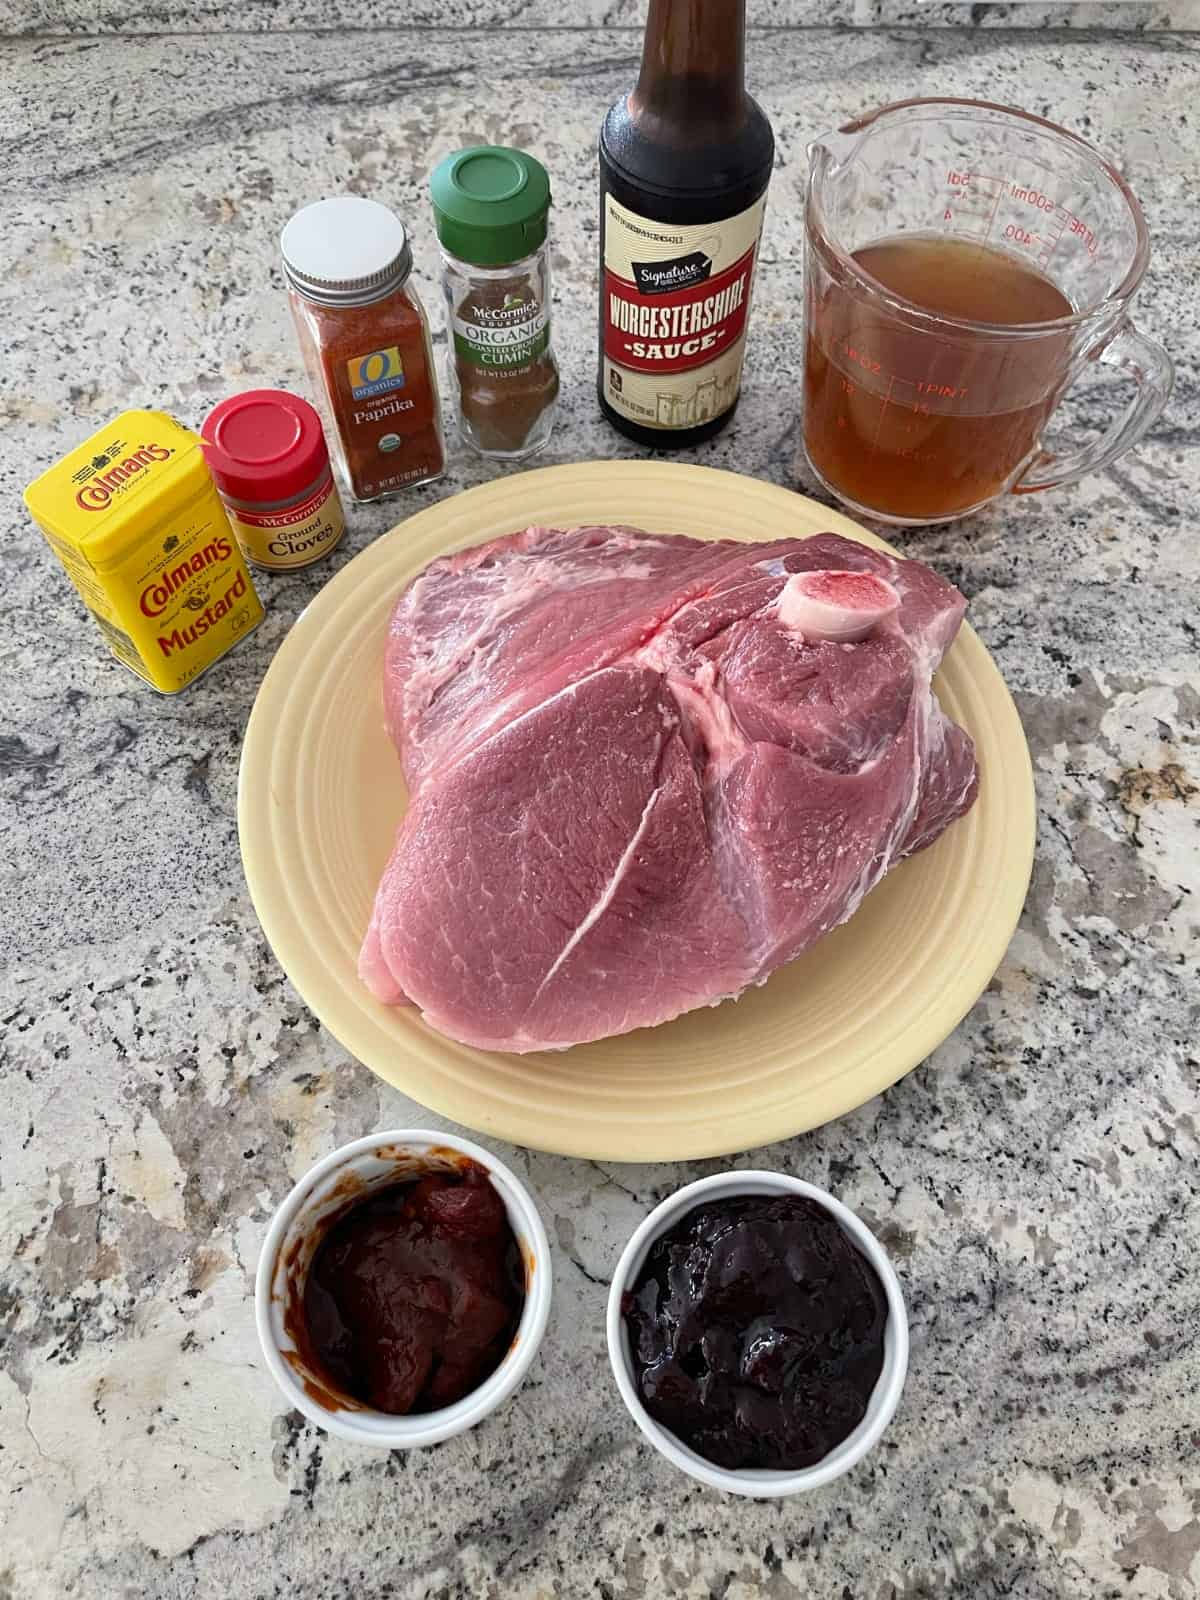 Ingredients for making Cherry Chipotle Pulled Pork including pork shoulder, cherry jam, chipotle peppers, chicken broth, Worcestershire sauce, cumin, paprika, cloves and dried mustard.